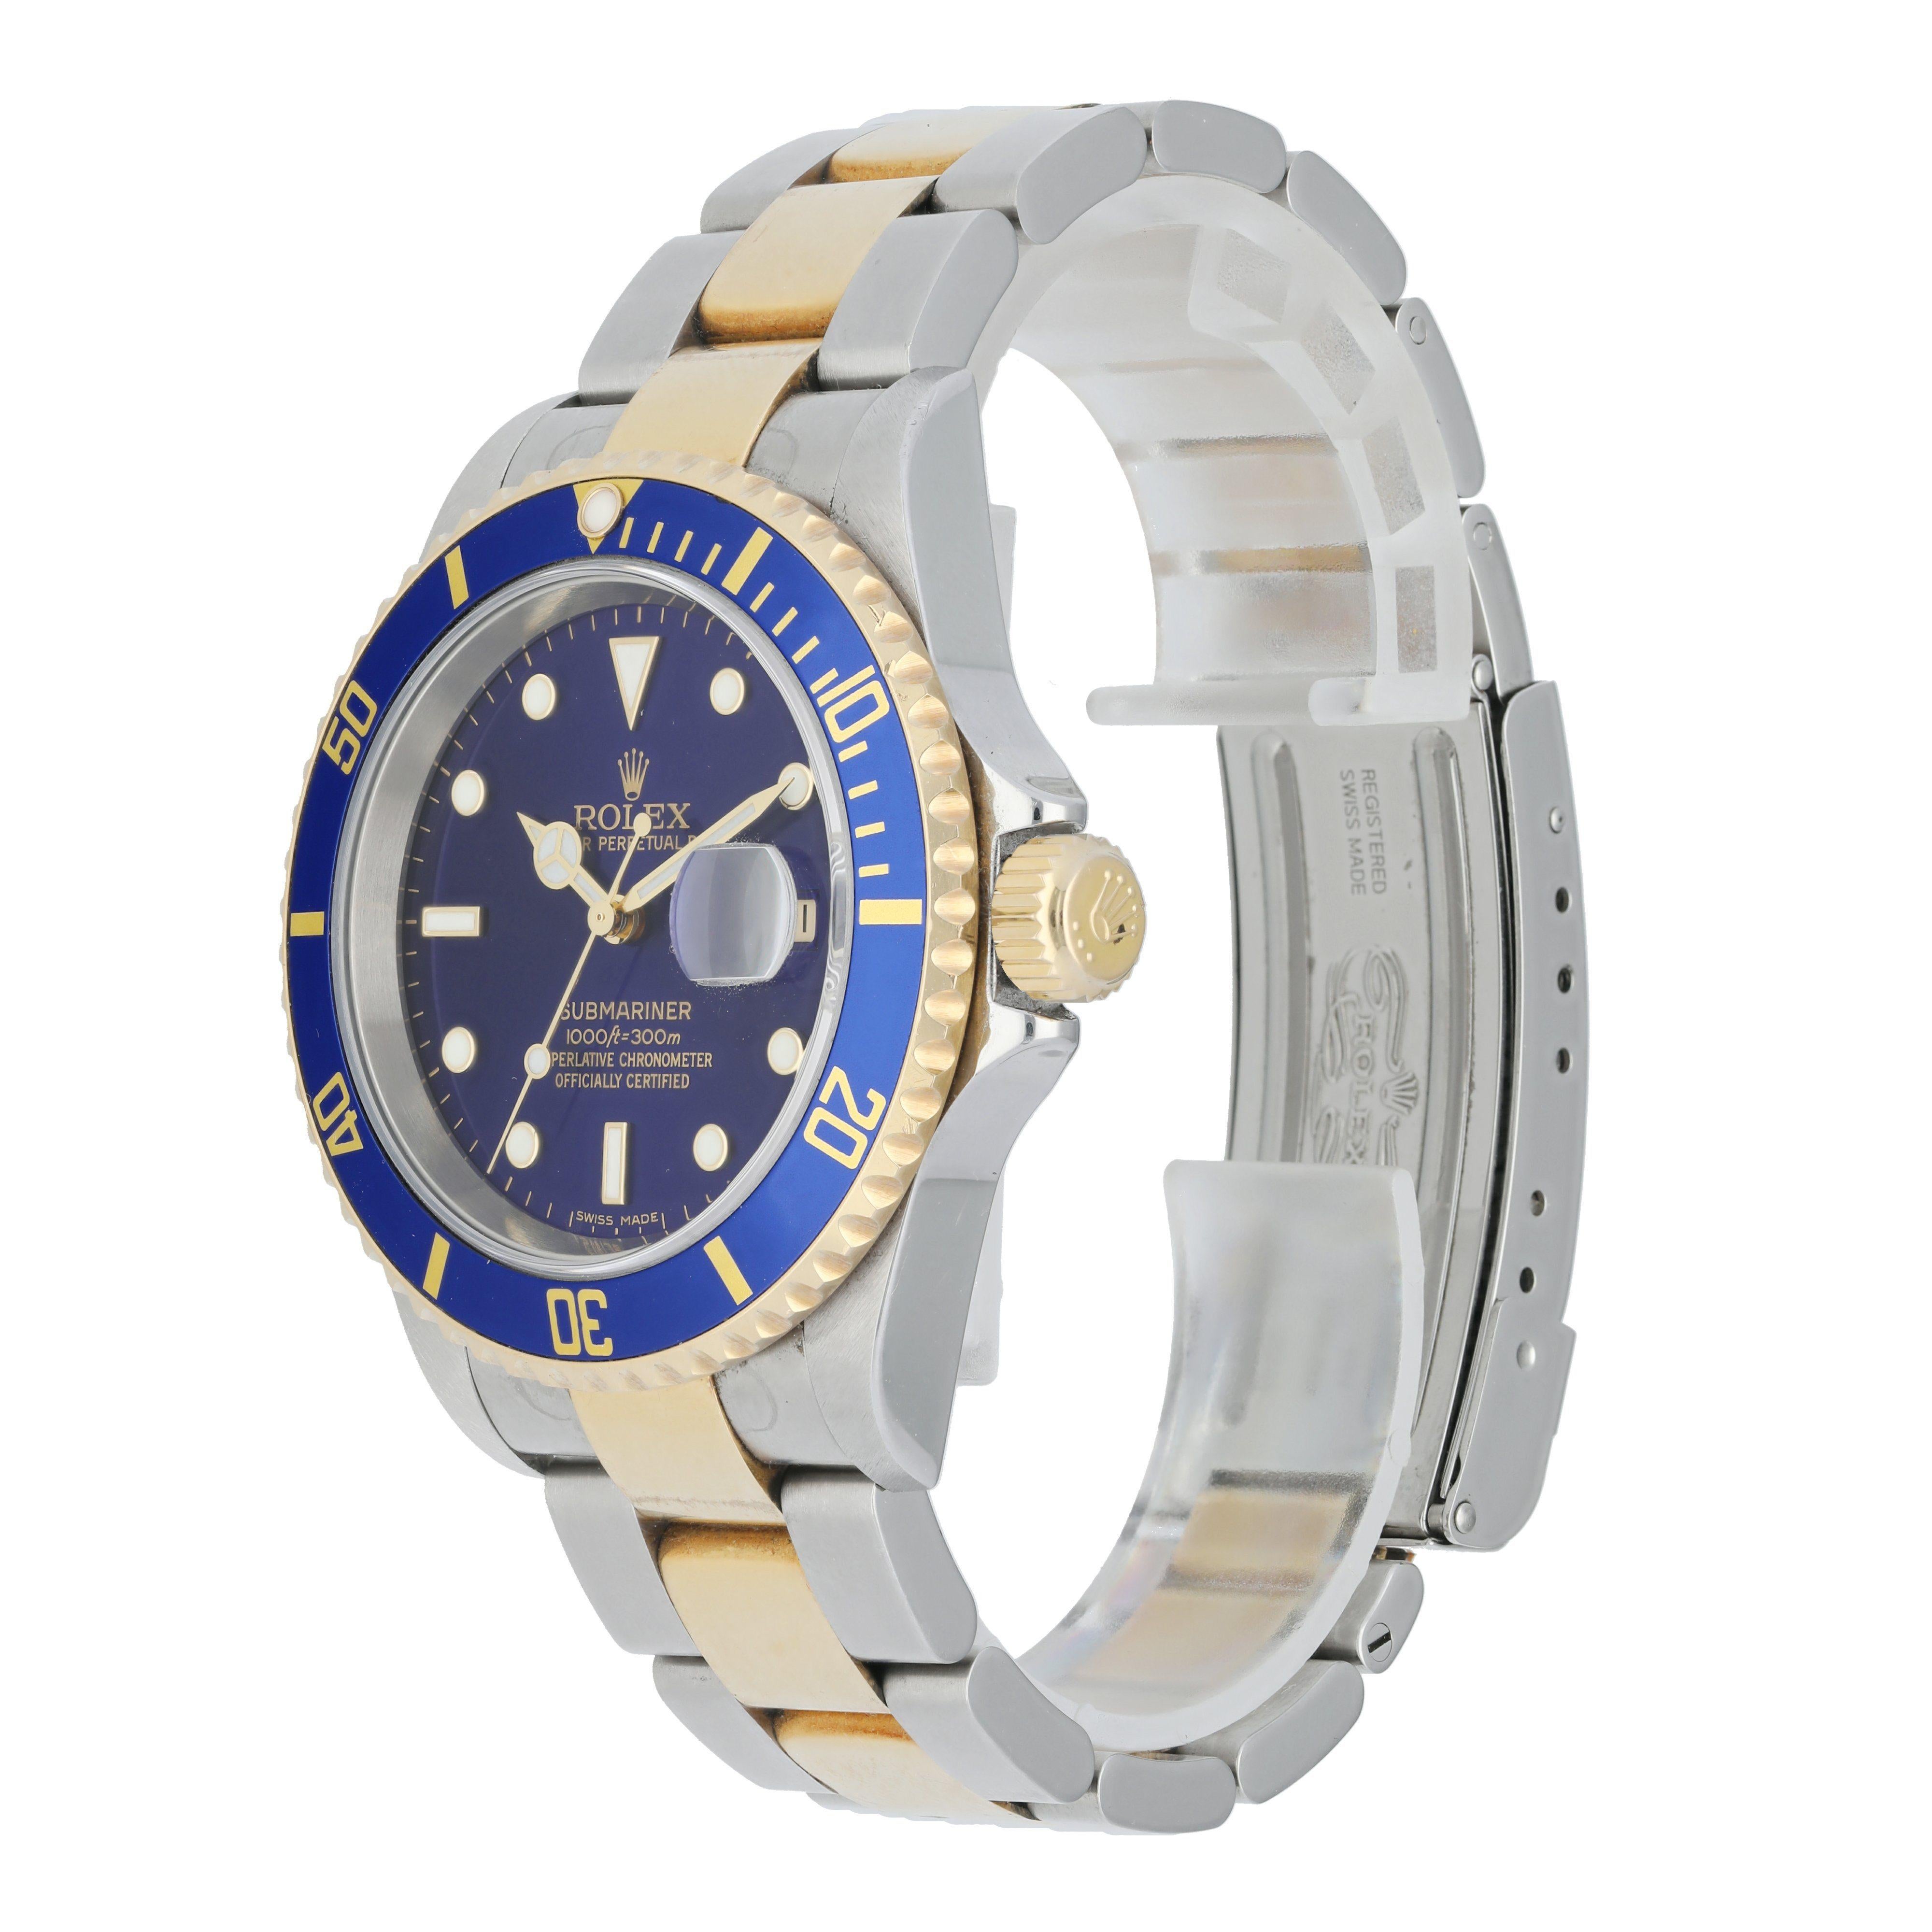 Rolex Submariner 16613T Men Watch. 
40mm Stainless Steel case. 
18k yellow gold bezel with blue insert.
Blue dial with luminous gold hands and luminous dot hour markers. 
Date display at the 3 o'clock position. 
Oyster two-tone Bracelet with